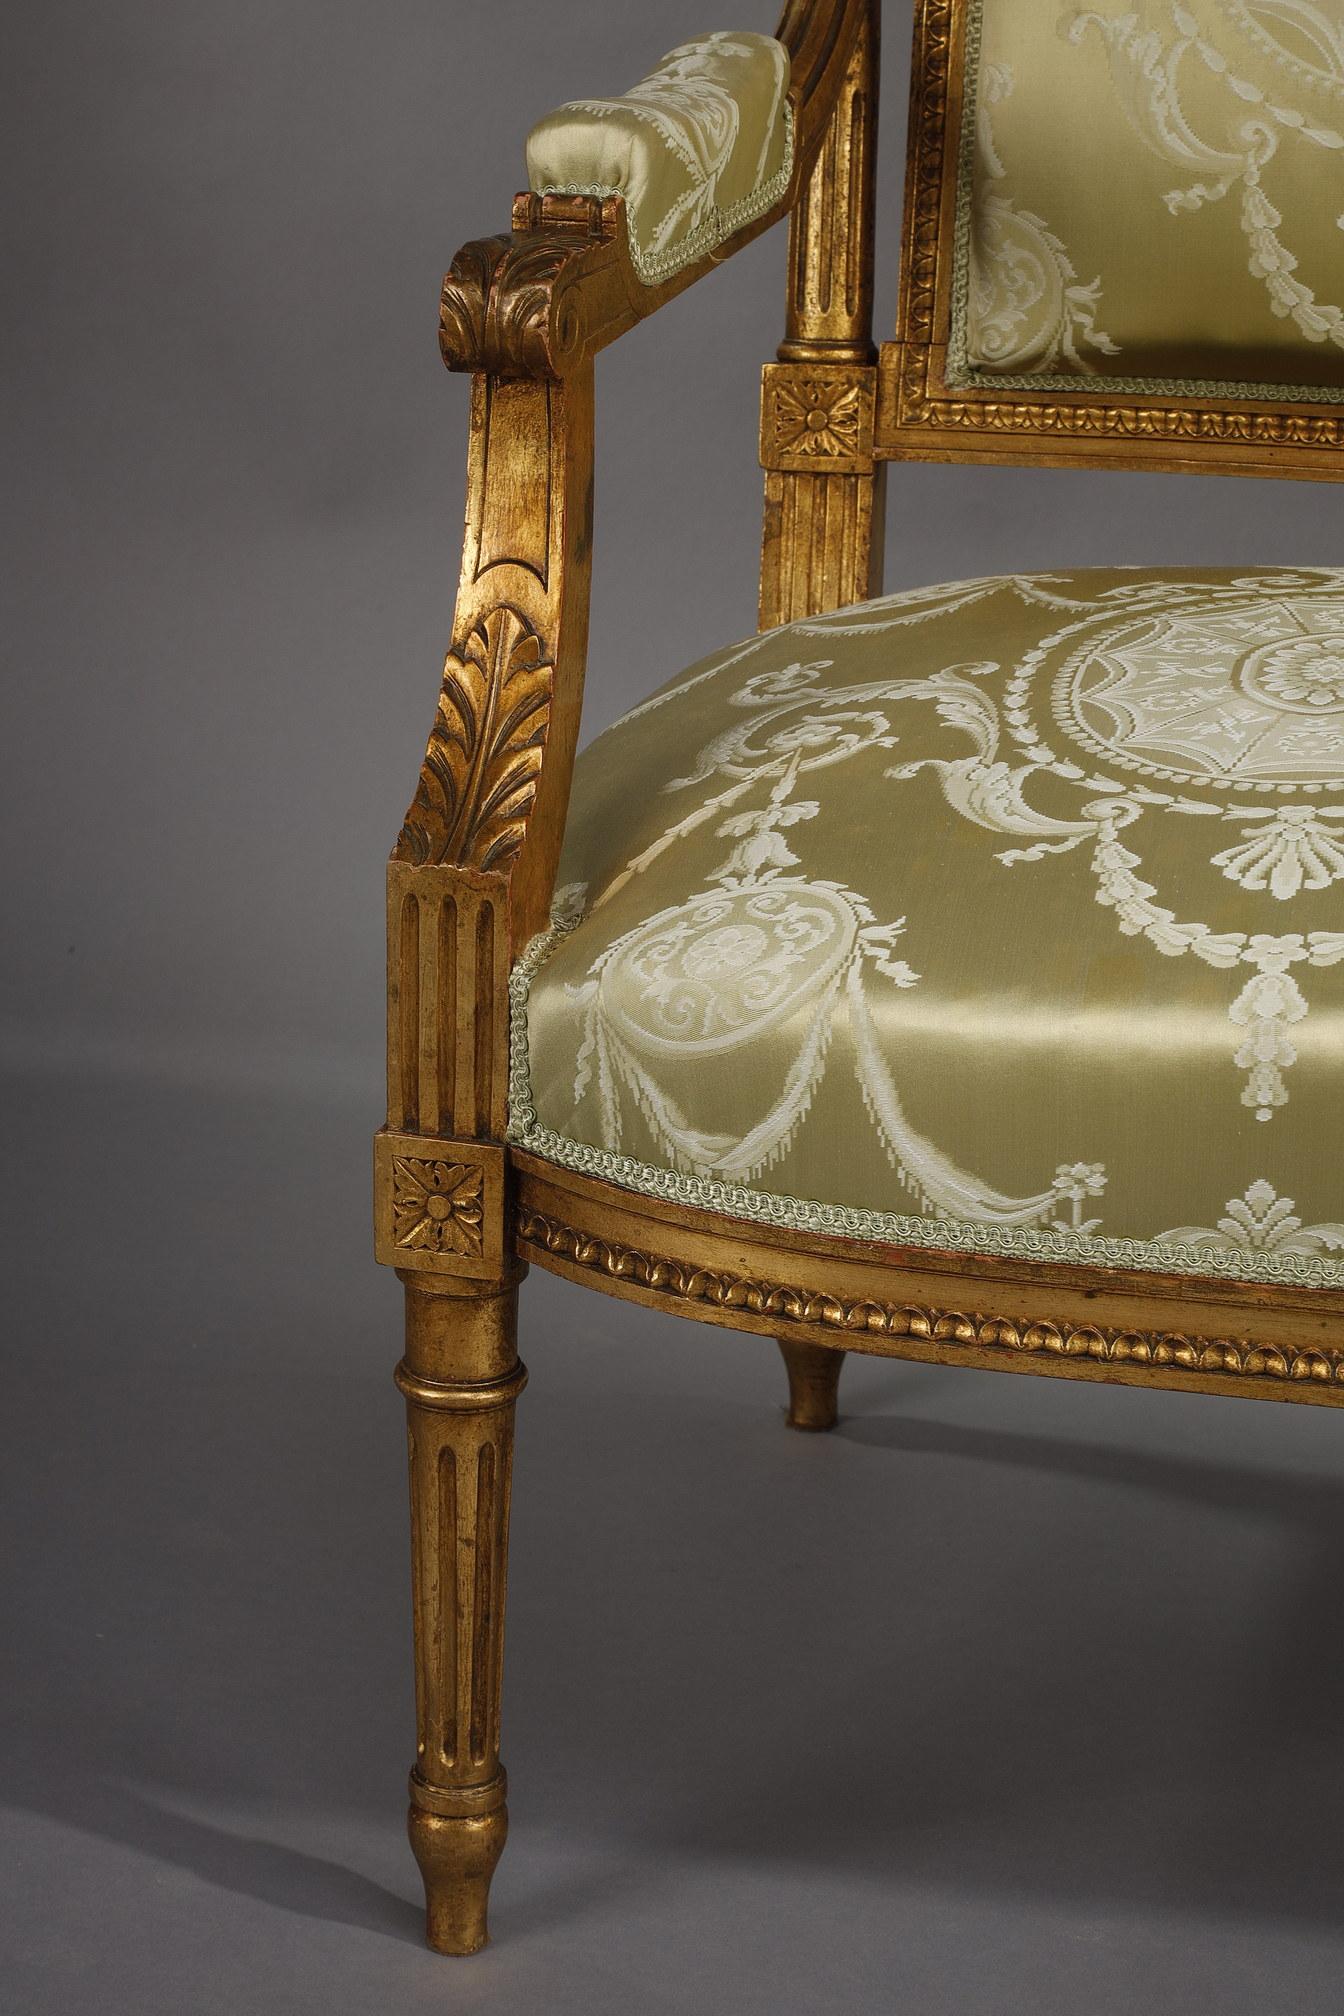 Louis XVI style living room ensemble in gilded wood with a sofa, two armchairs and two chairs. The posts are made of detached fluted columns and topped by dice with flowers and small feathers sculptures. The base is composed of fluted and tapered